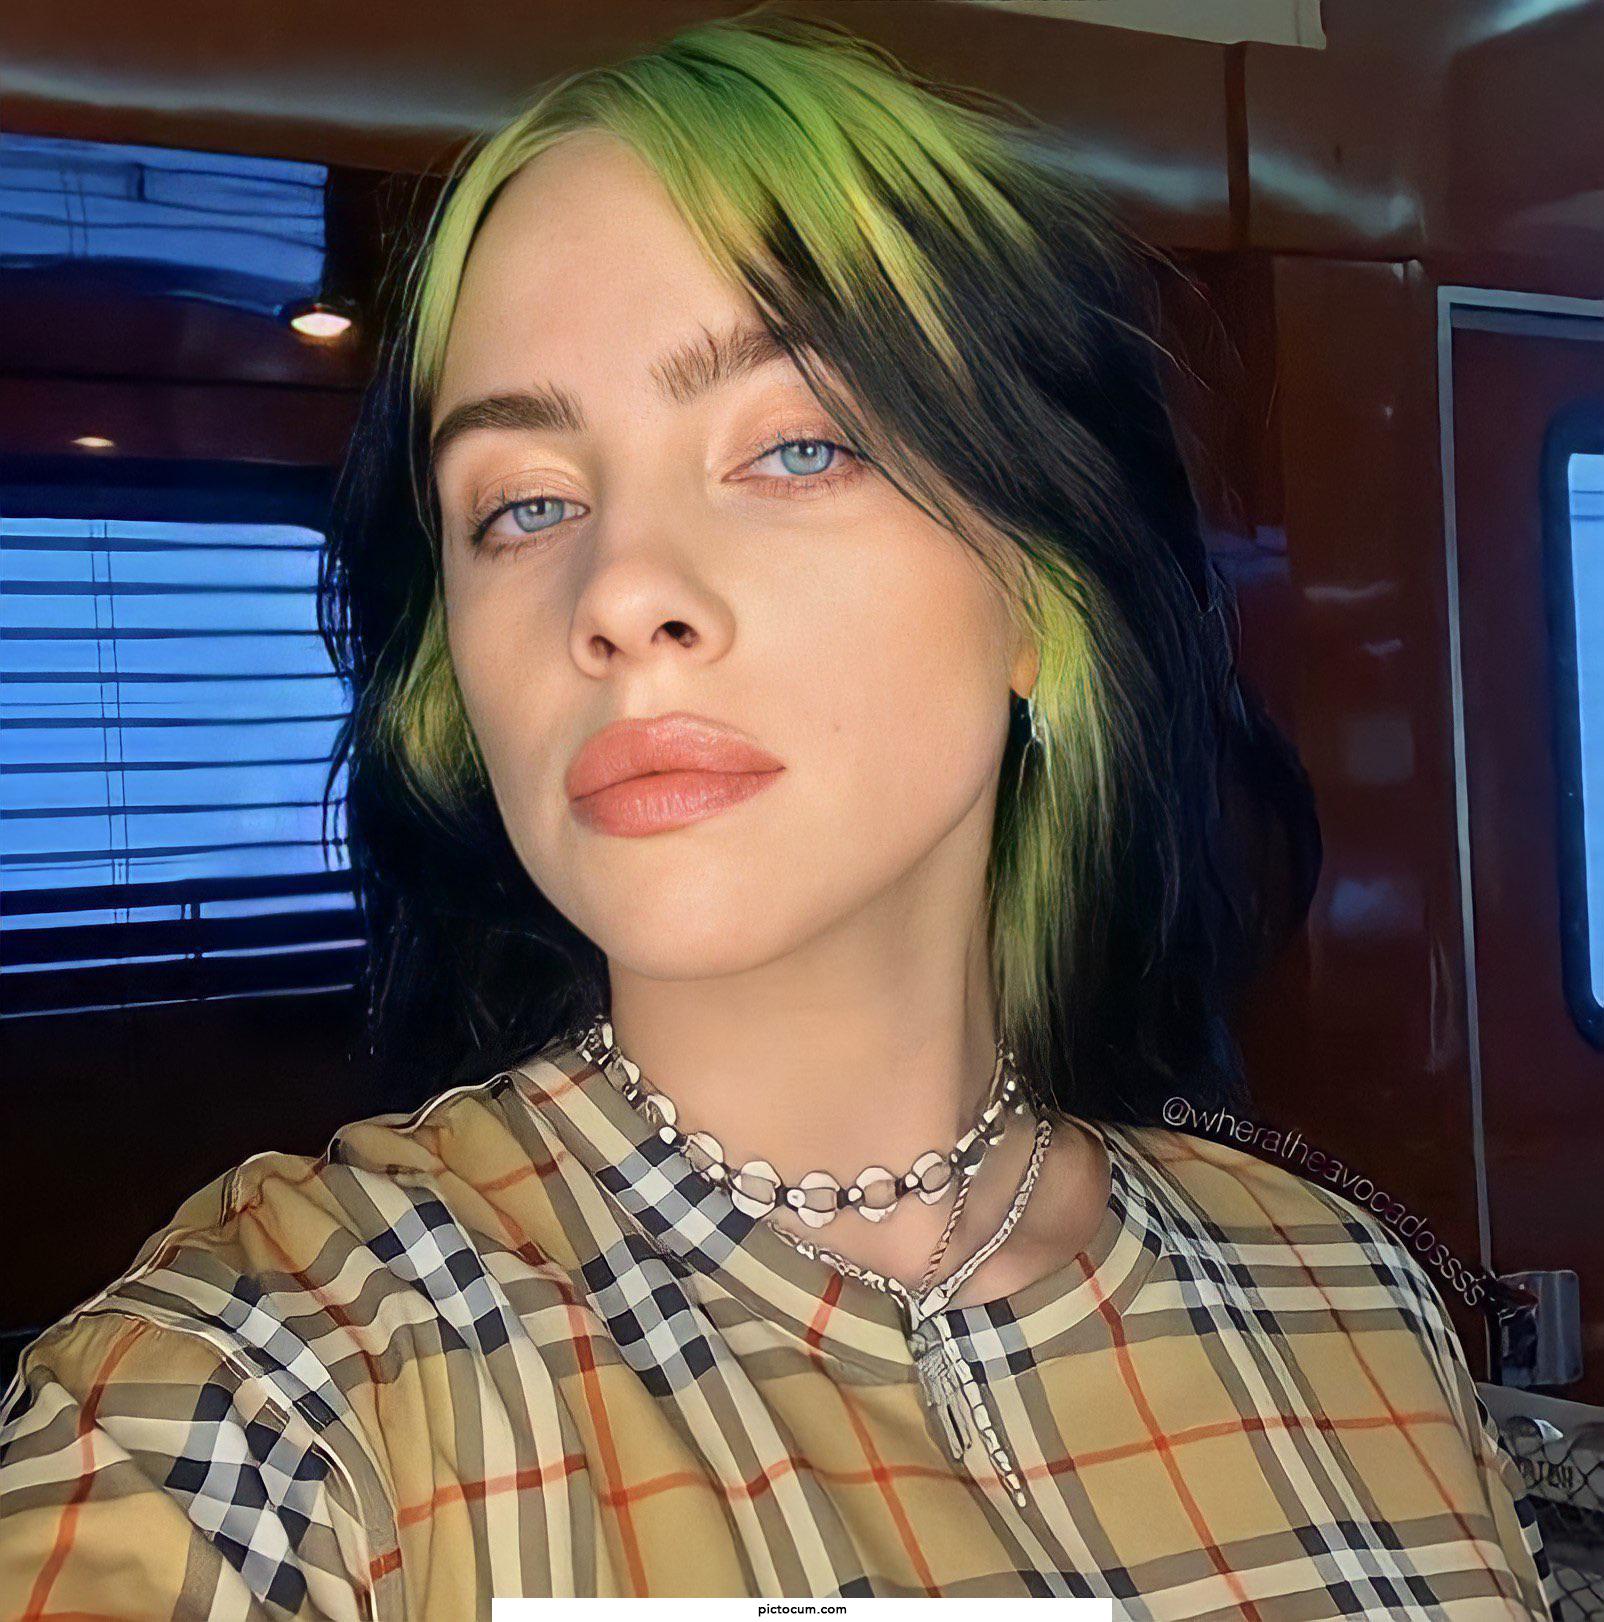 Another day and more loads fucked into my fleshlights for billie eilish